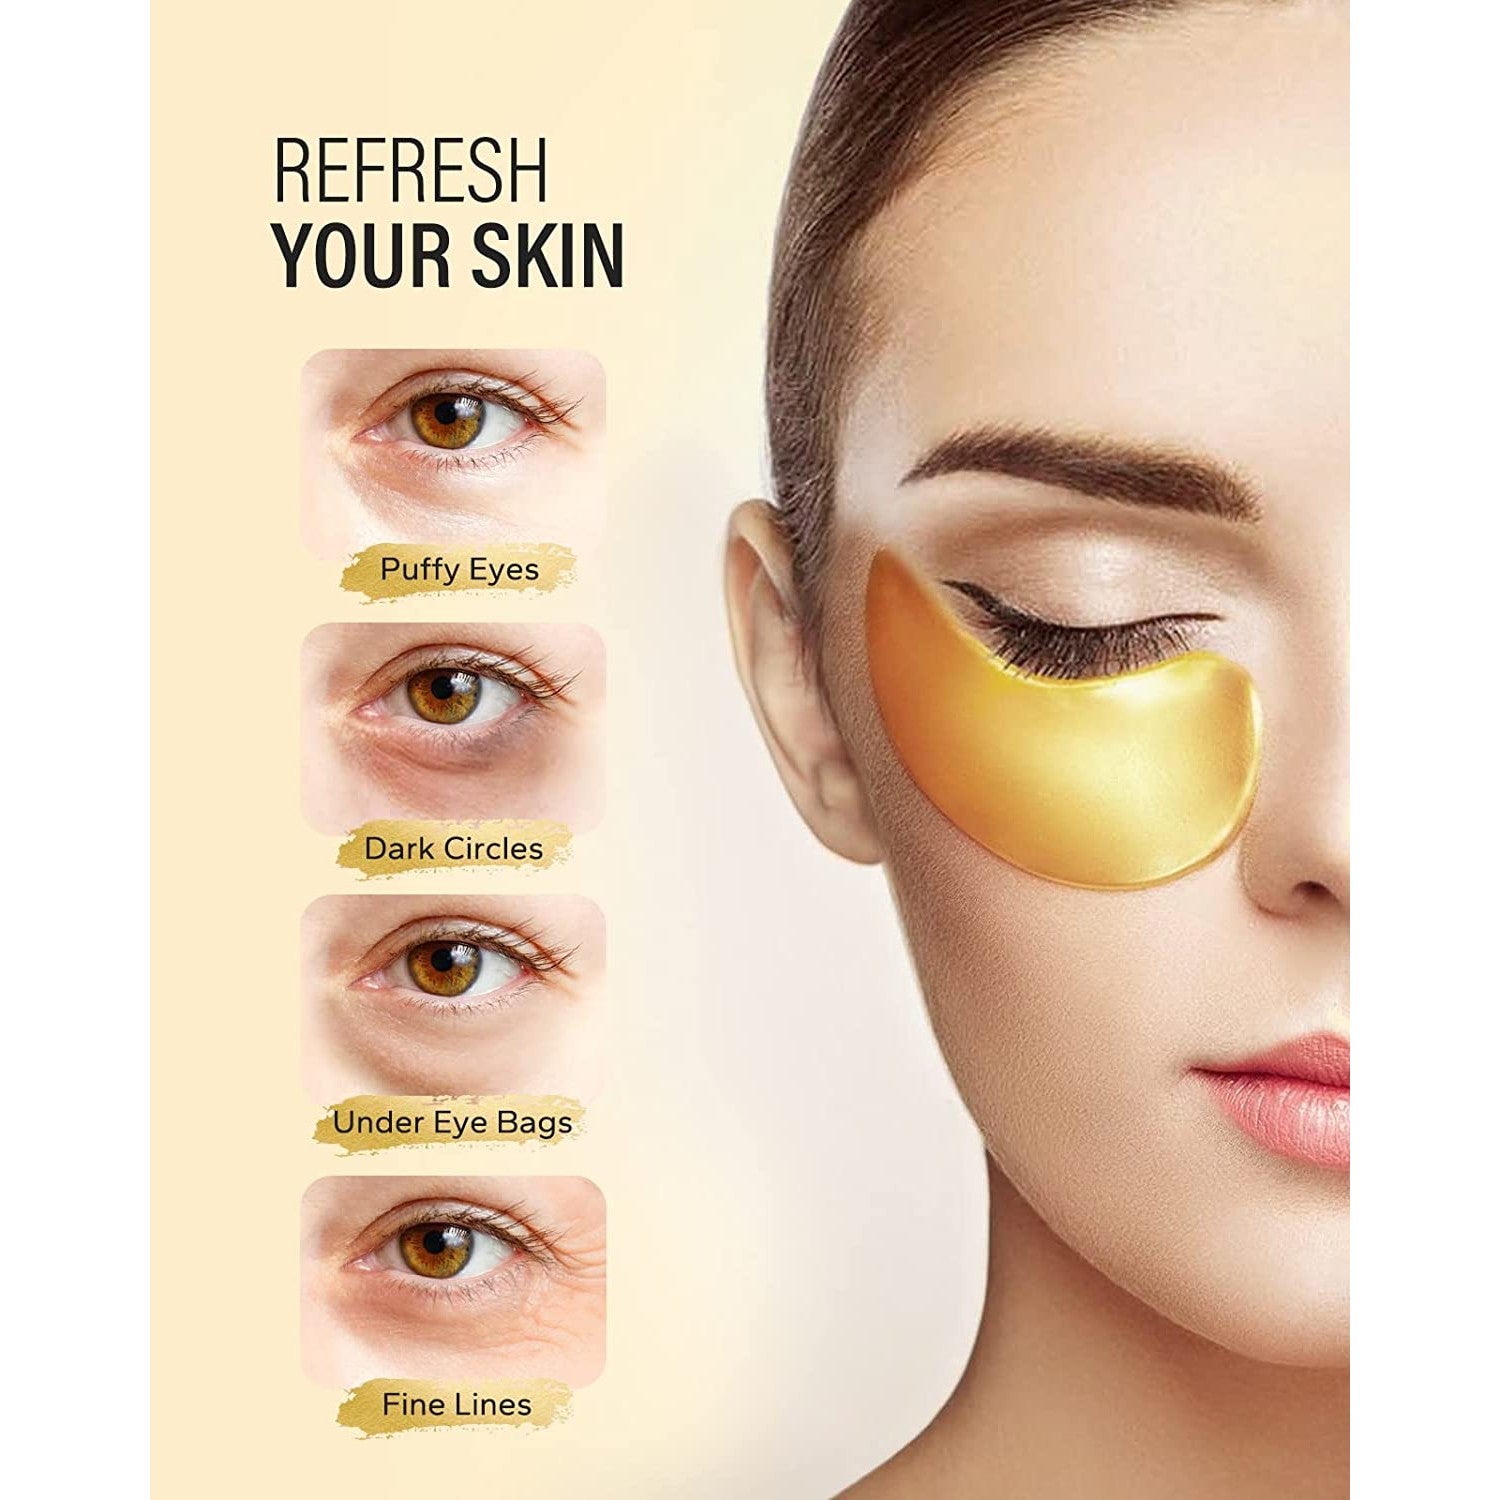 A woman has a gold colored eye mask under one eye. The text says, 'Refresh your skin. Puffy eyes, dark circles, under eye bags, fine lines.'